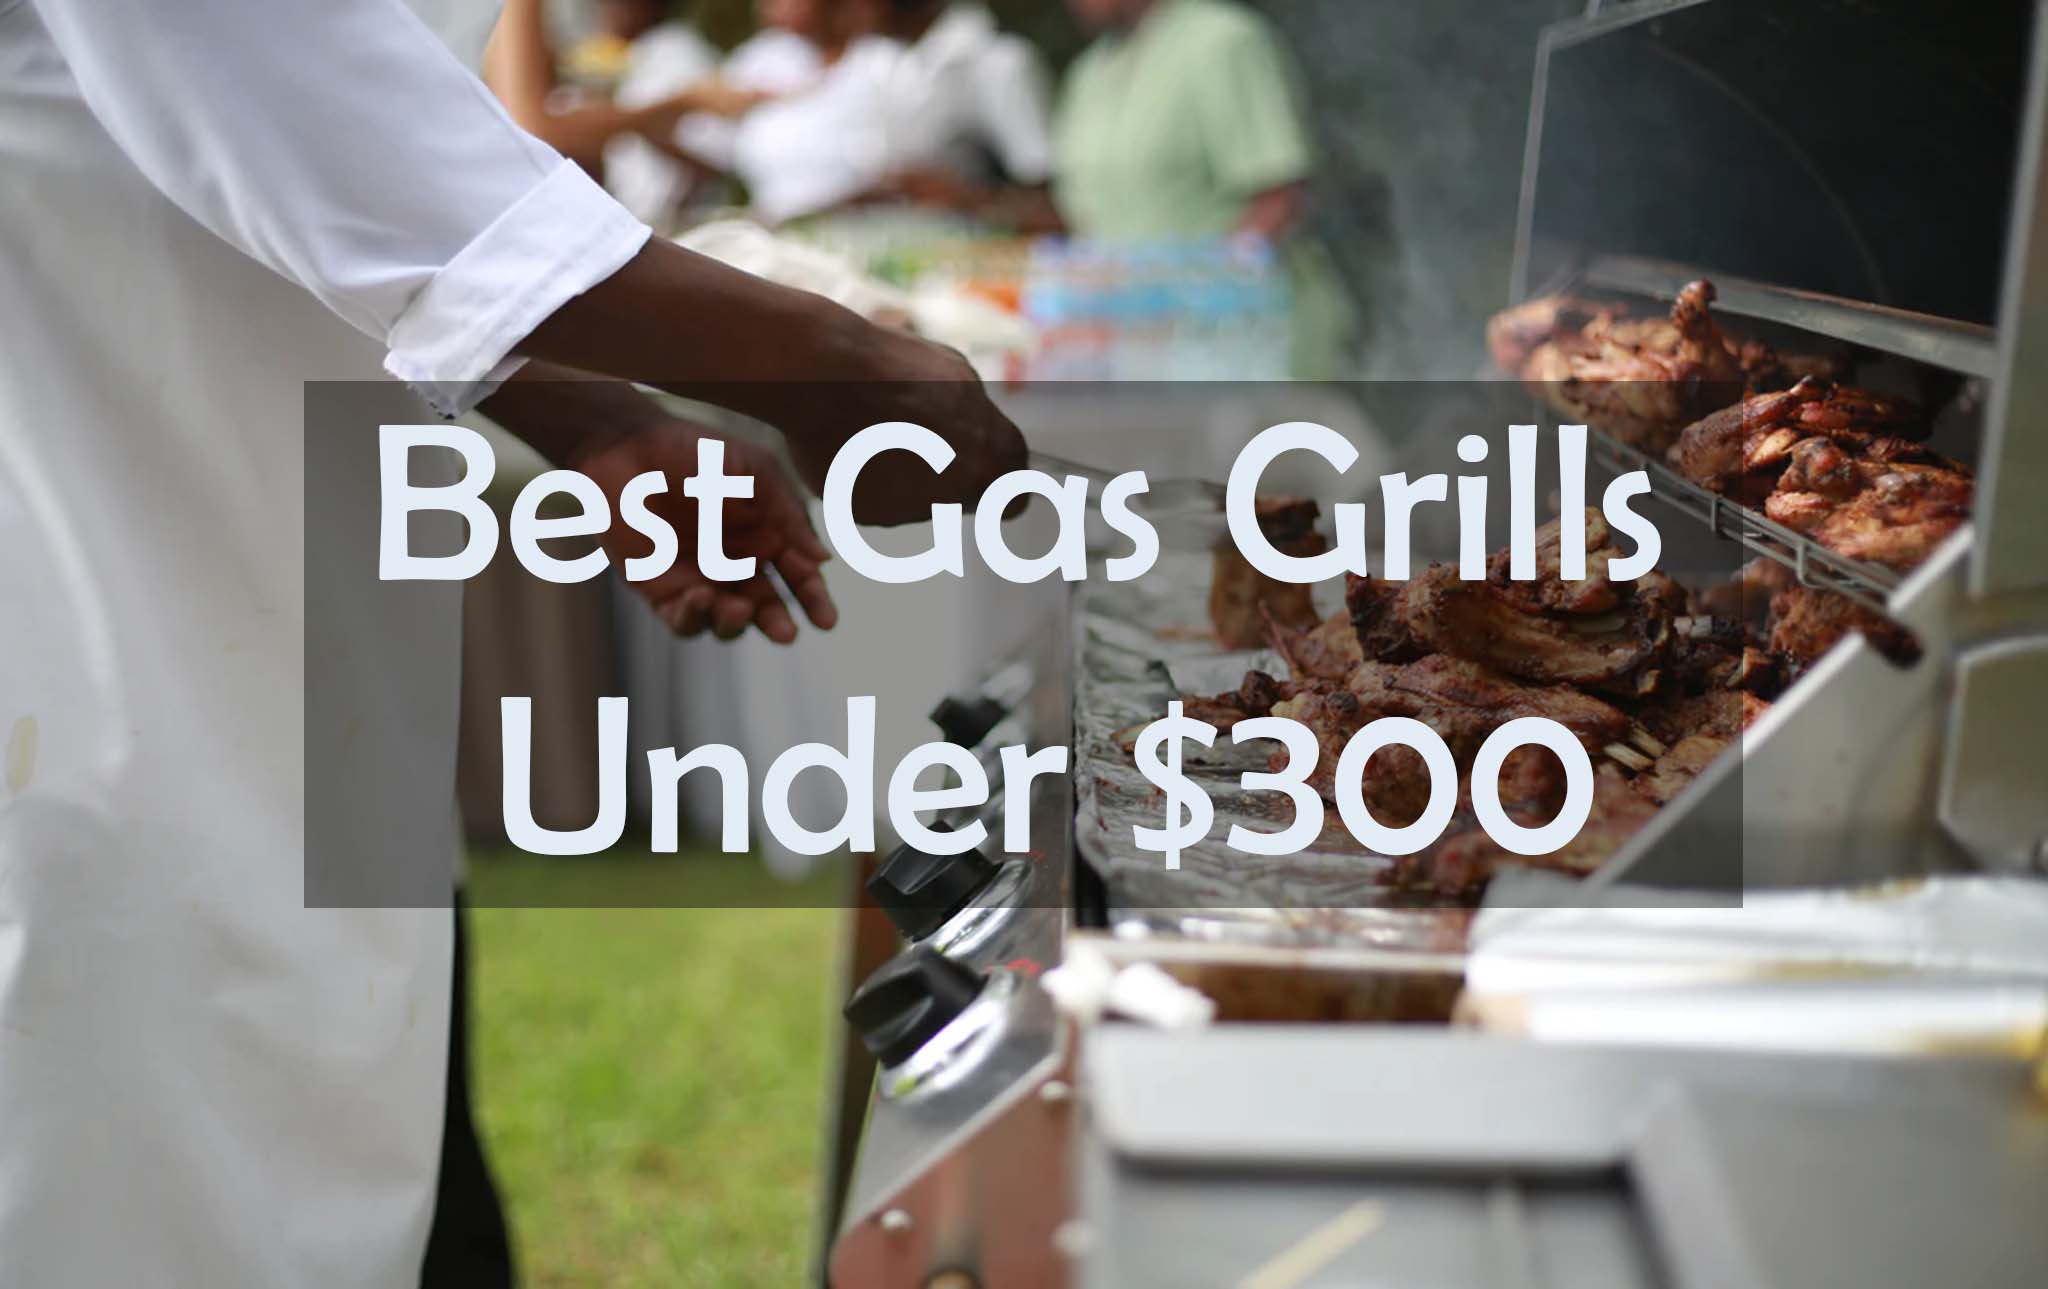 Best Gas Grills Under $300 in 2019 - Top Rated Gas Grills Reviewed